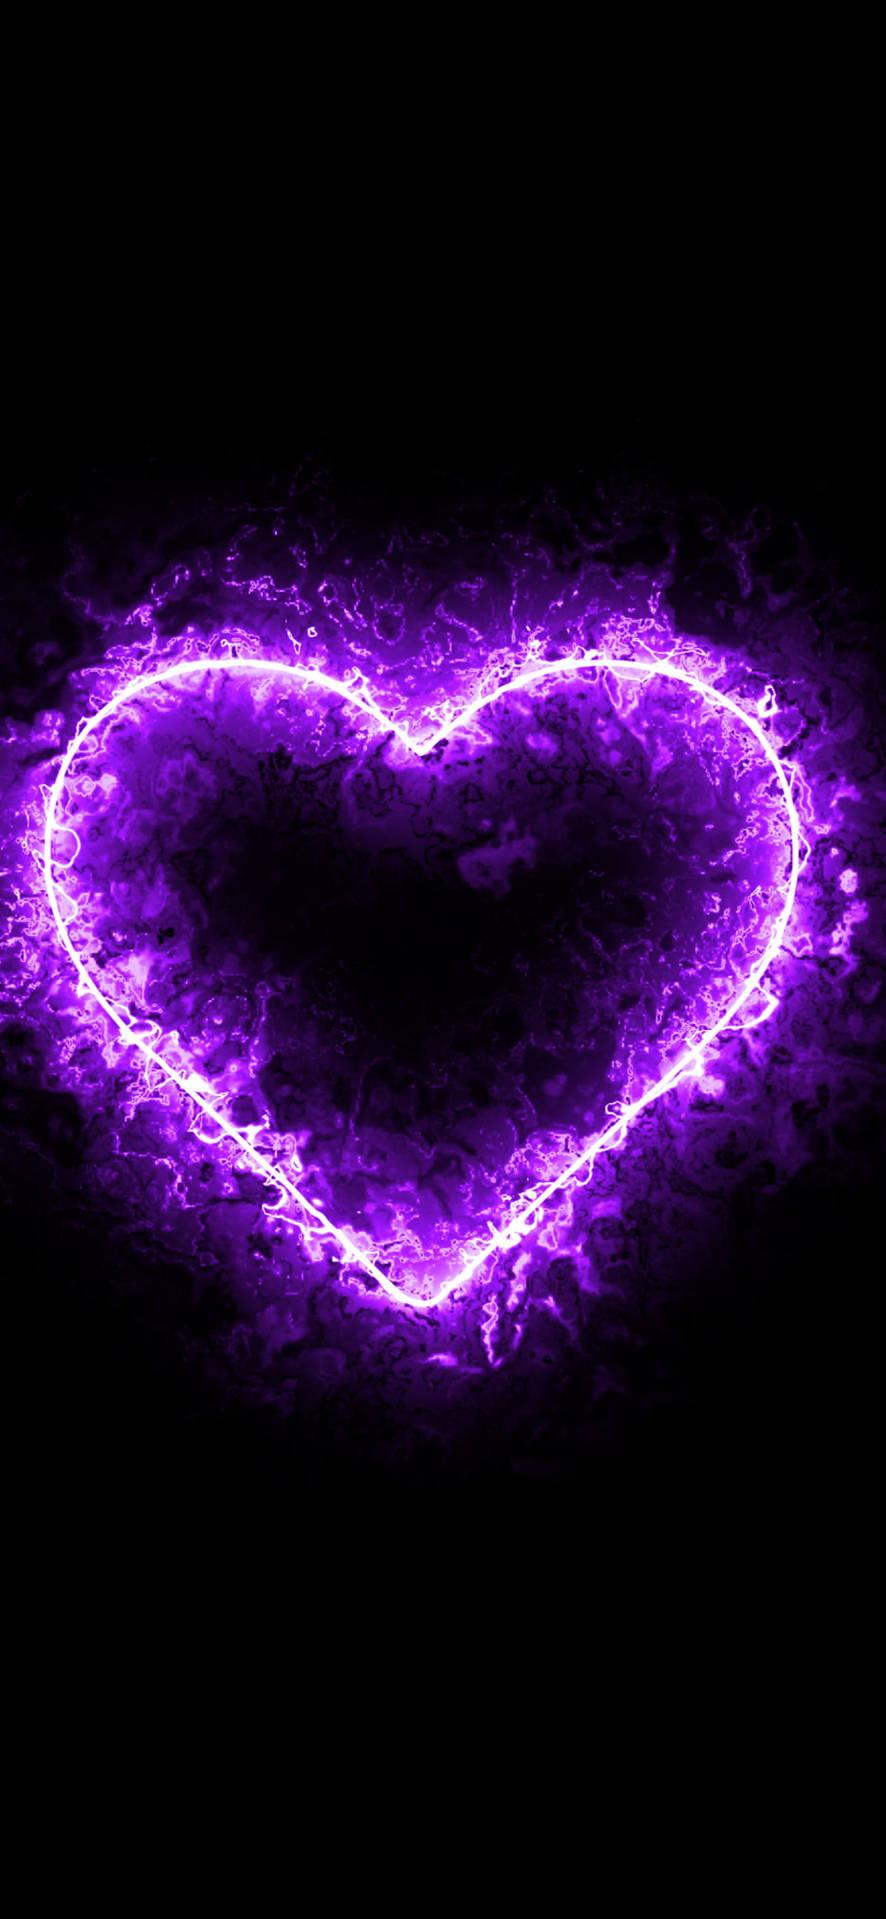 Black And Purple Aesthetic Textured Heart Wallpaper